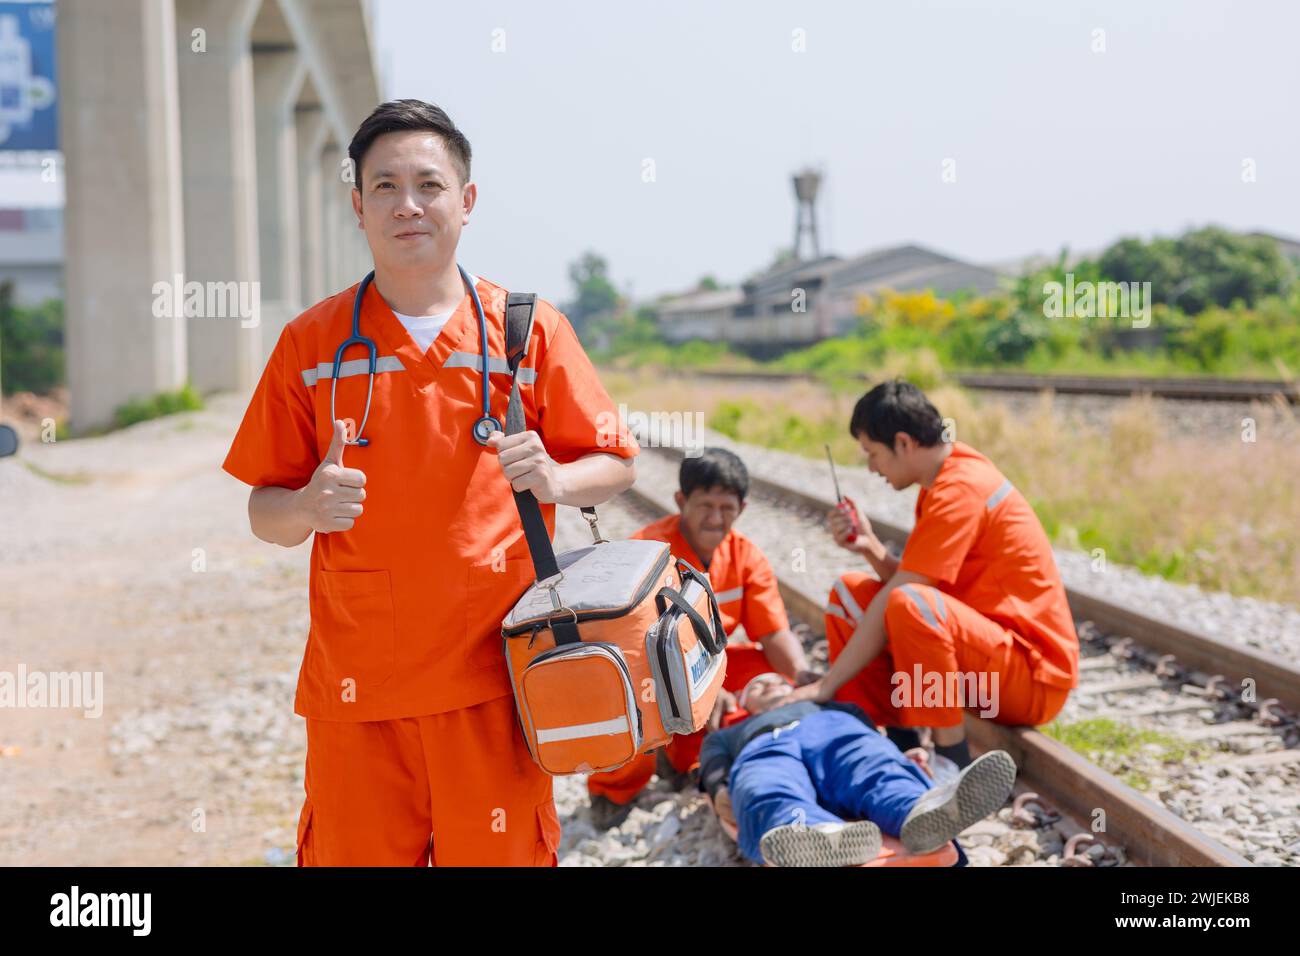 paramedic,medical,emergency,doctor,team,working,in,action,help,first,aid,save,people,life,at,accident,site,outdoors Stock Photo